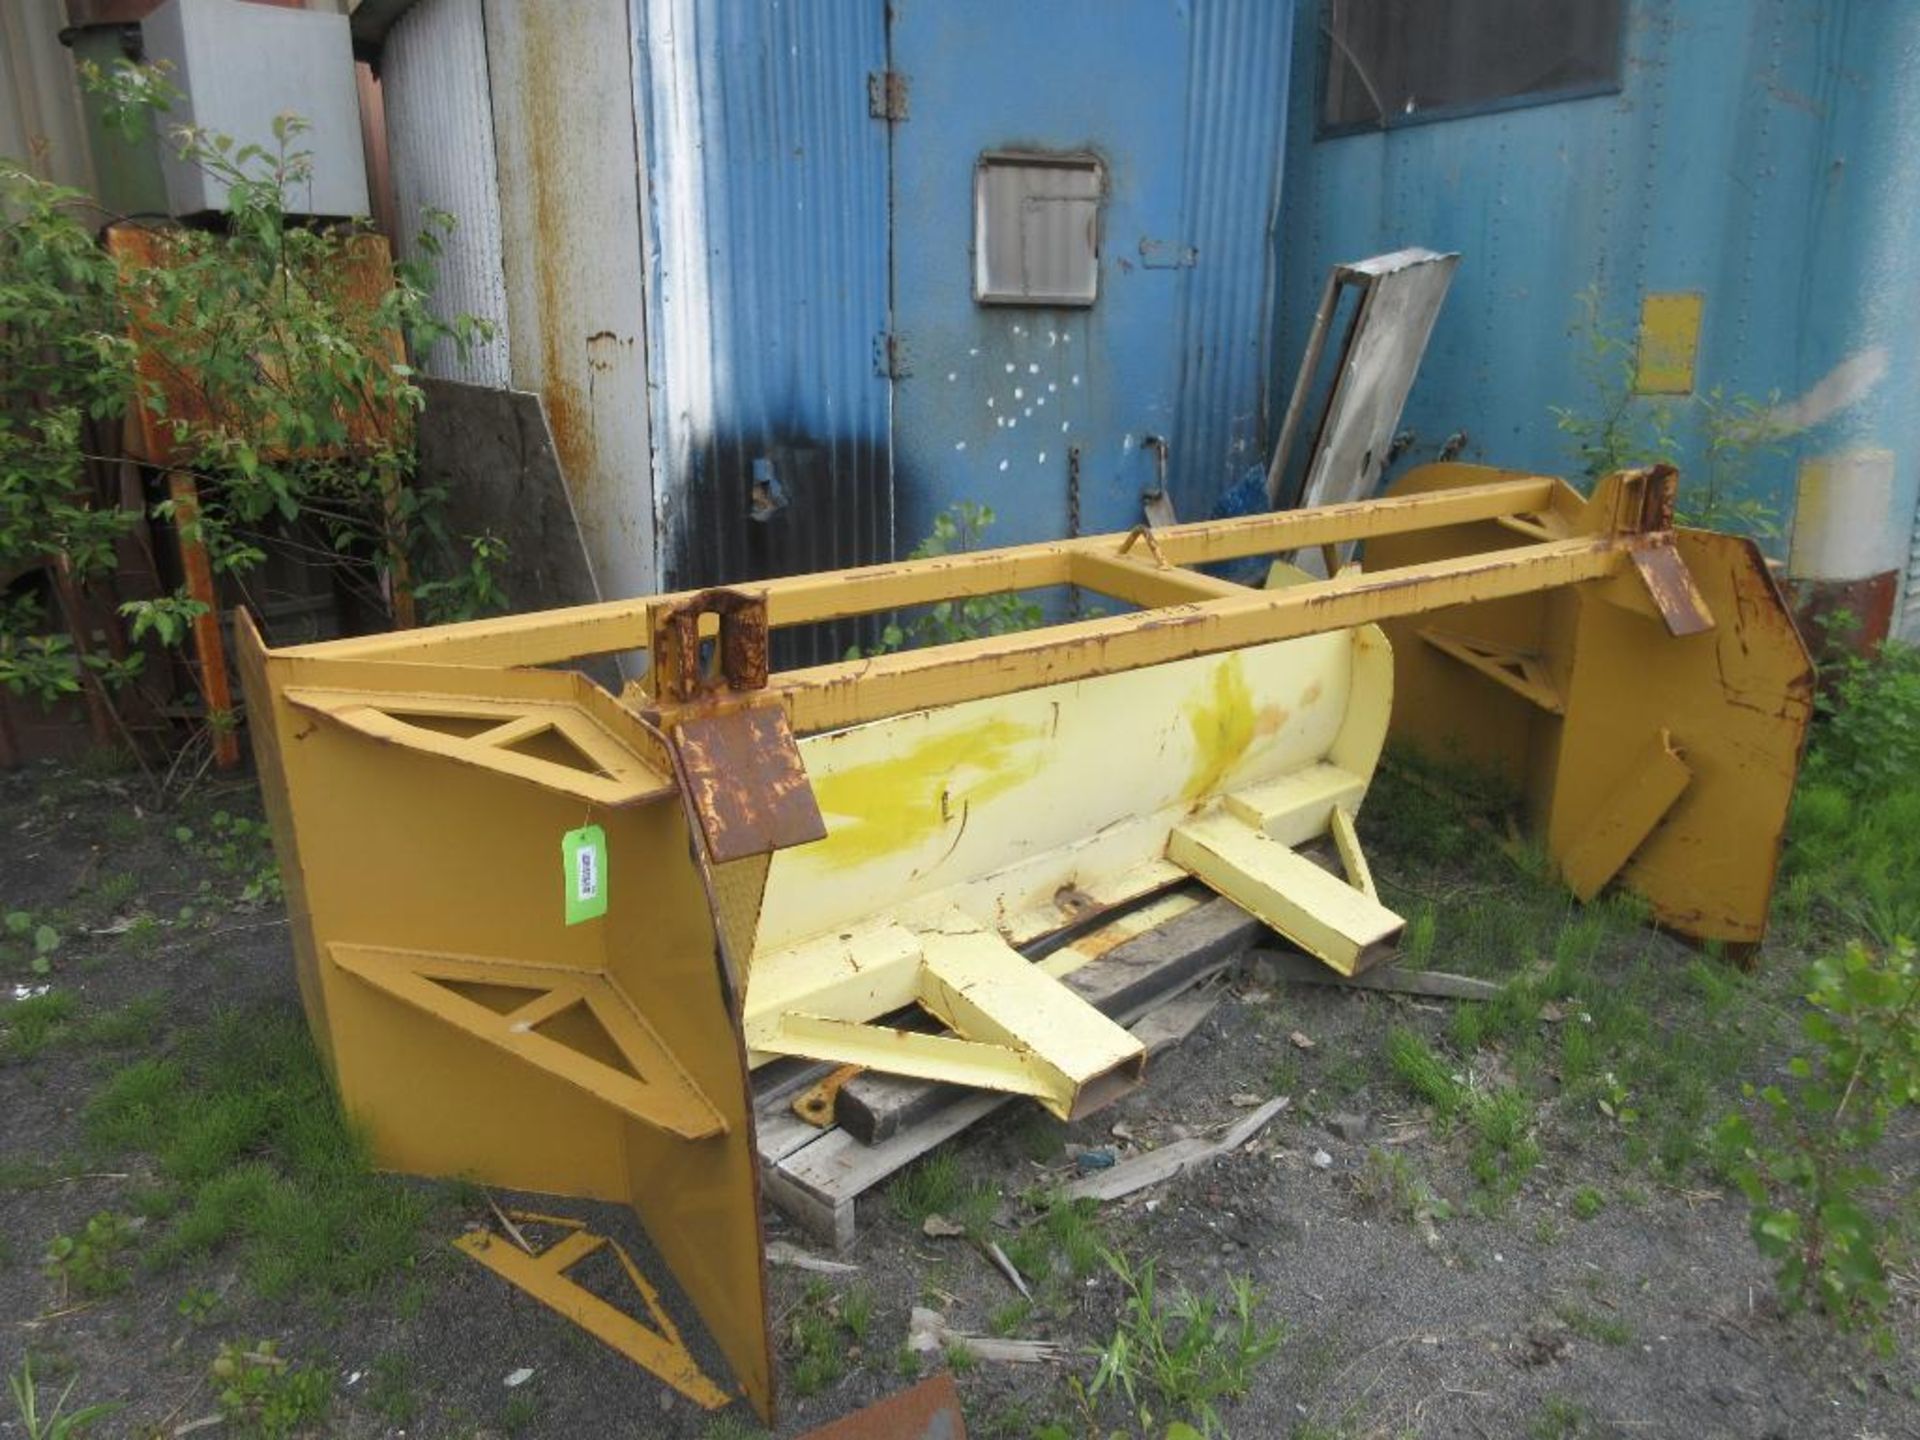 LOT OF 6 SNOW PLOUGH IBG.GRATING FOR TRUCK ATTACHMENTS (NORTH PAINT BLDG) - Image 10 of 14